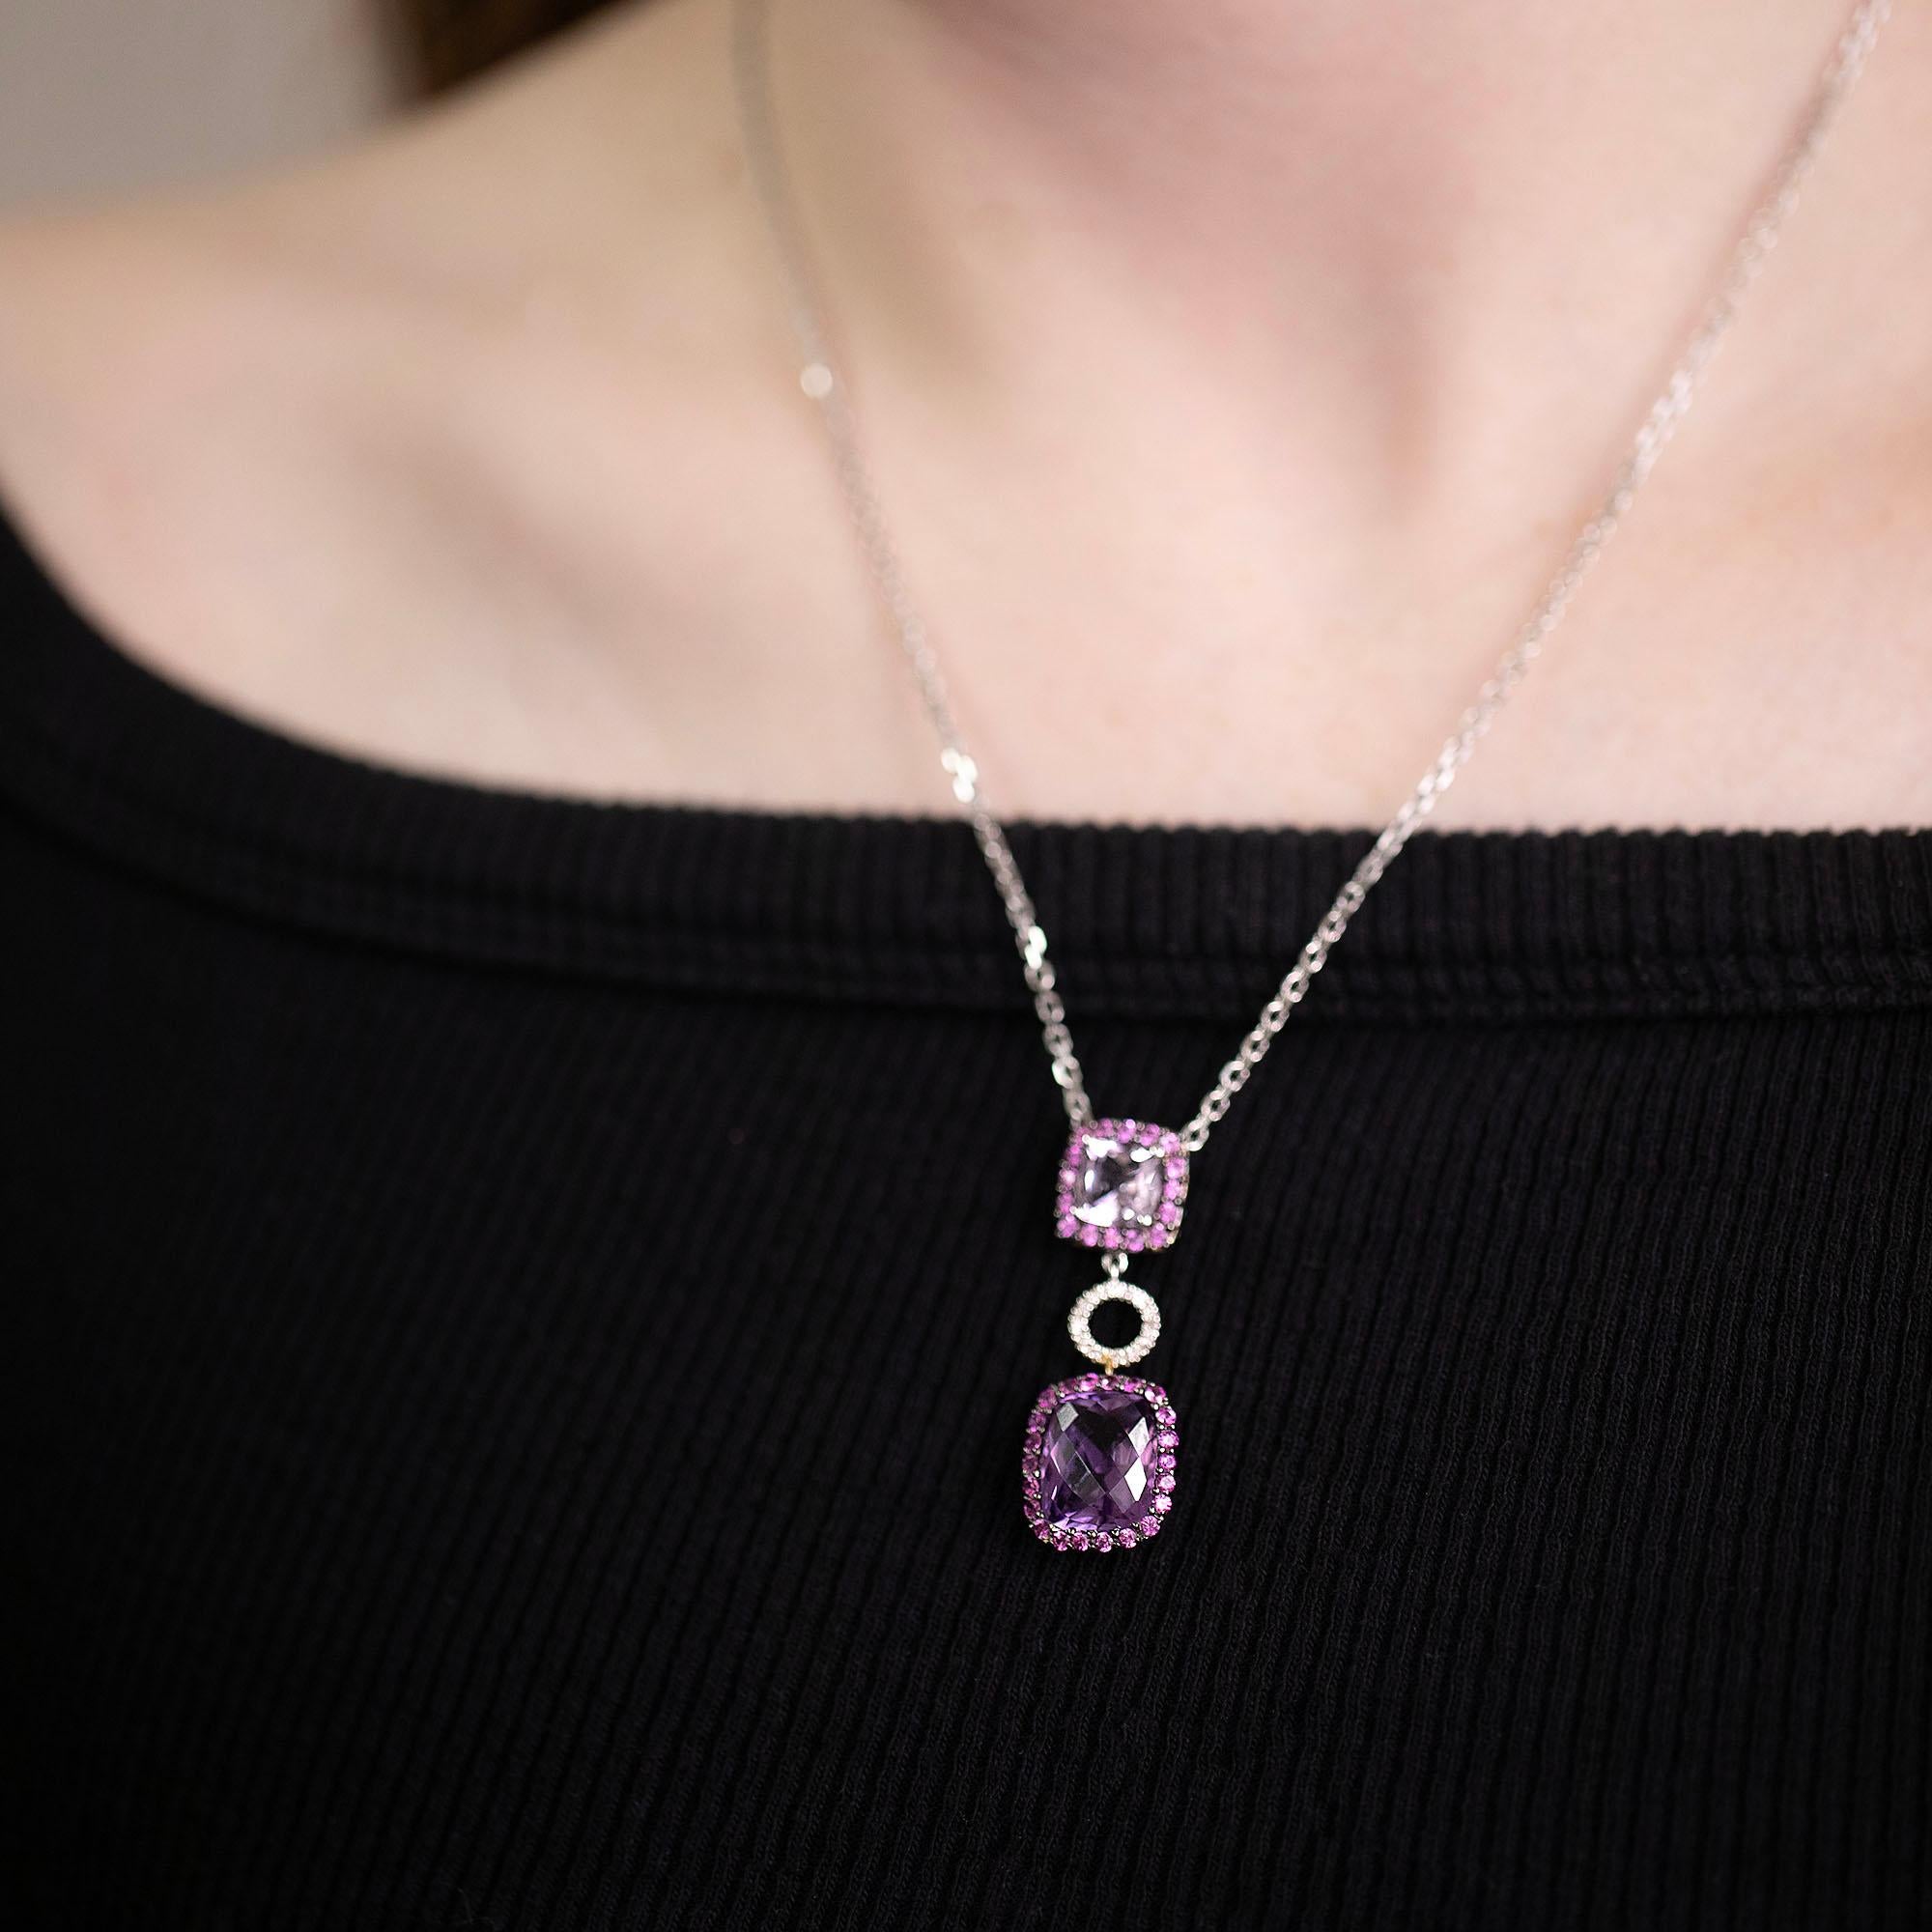 Modern amethyst, pink sapphire & diamond necklet, featuring double drop pendant in 14k gold and black rhodium detail. A fun play of colour to a glamorous piece of jewellery with an unique checkerboard cushion cut amethyst.

Gemstone: One Amethyst